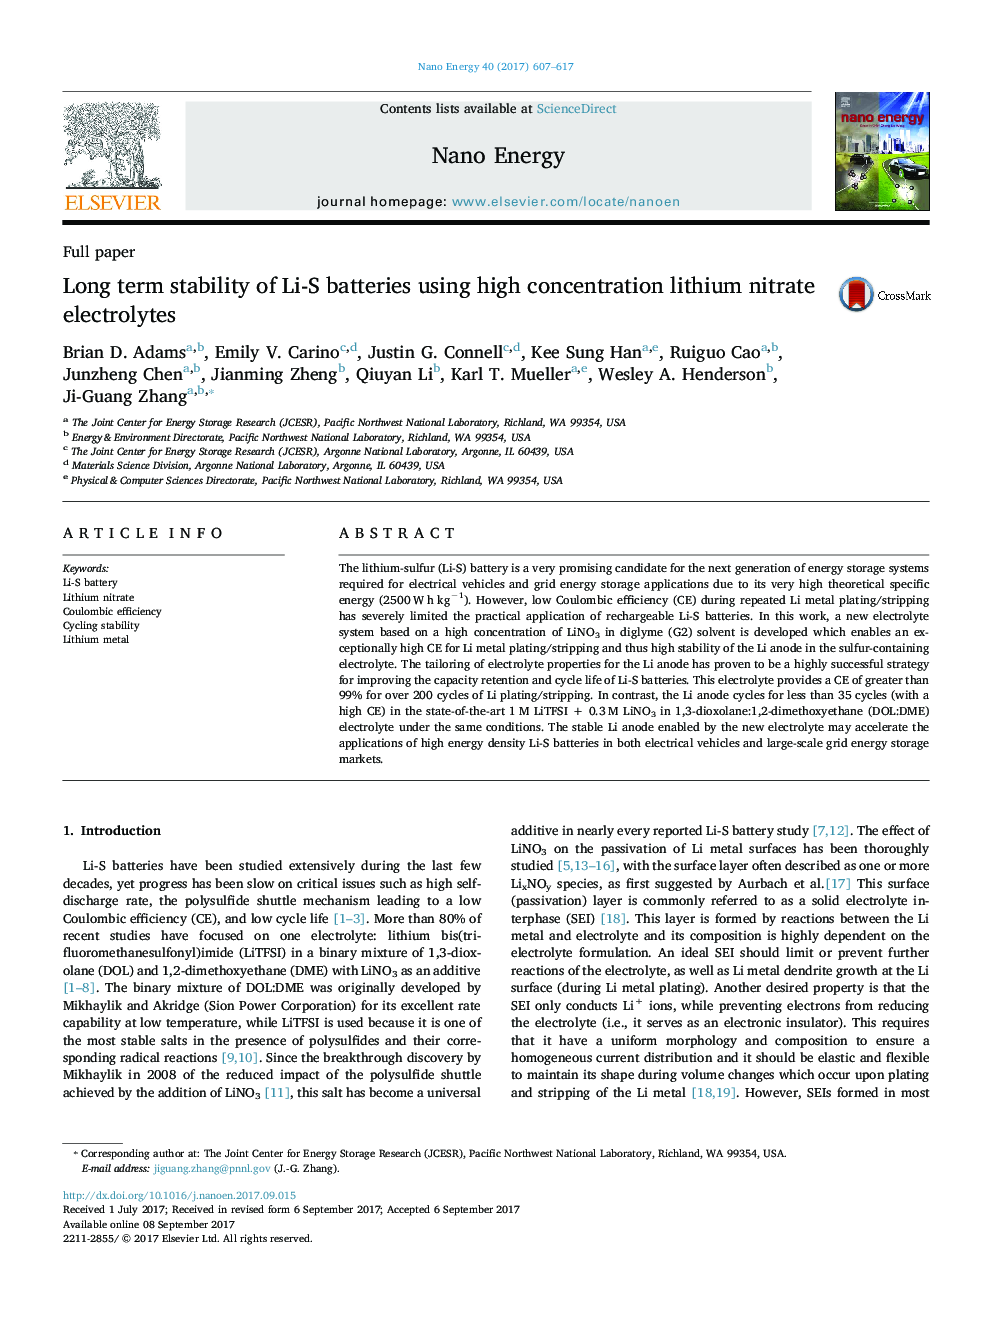 Long term stability of Li-S batteries using high concentration lithium nitrate electrolytes